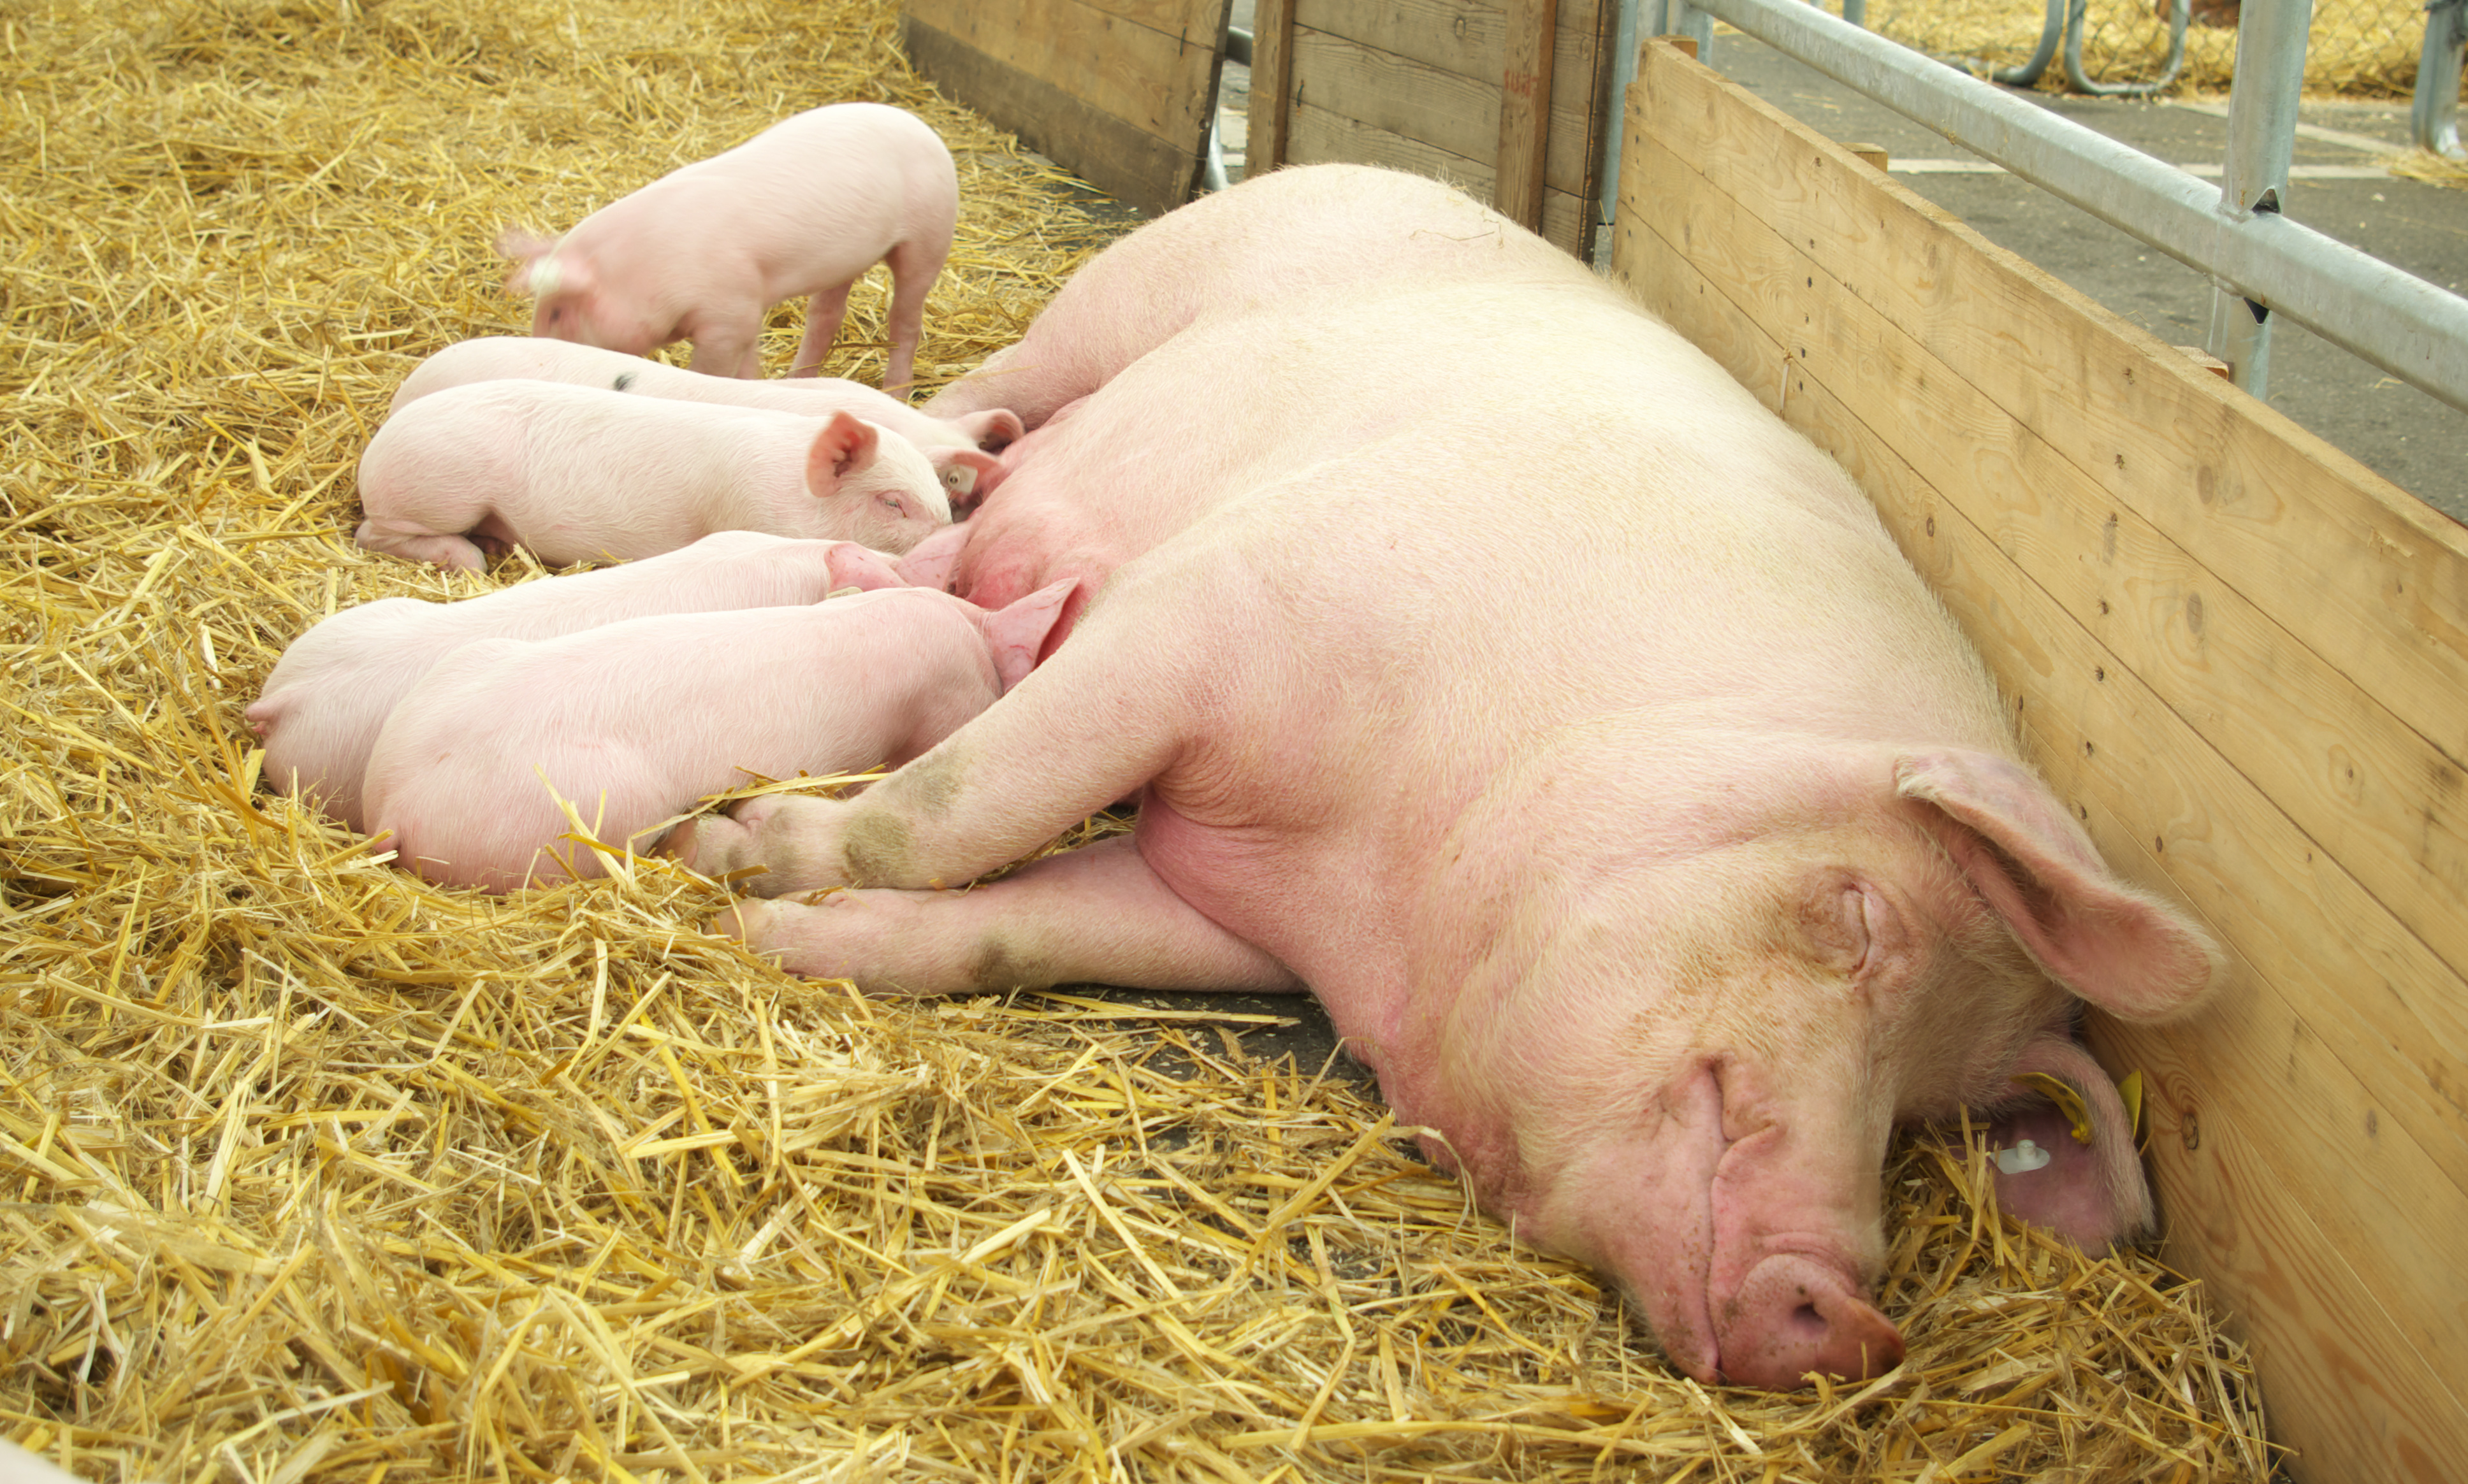 piglets suckle from a sow in an open straw pen